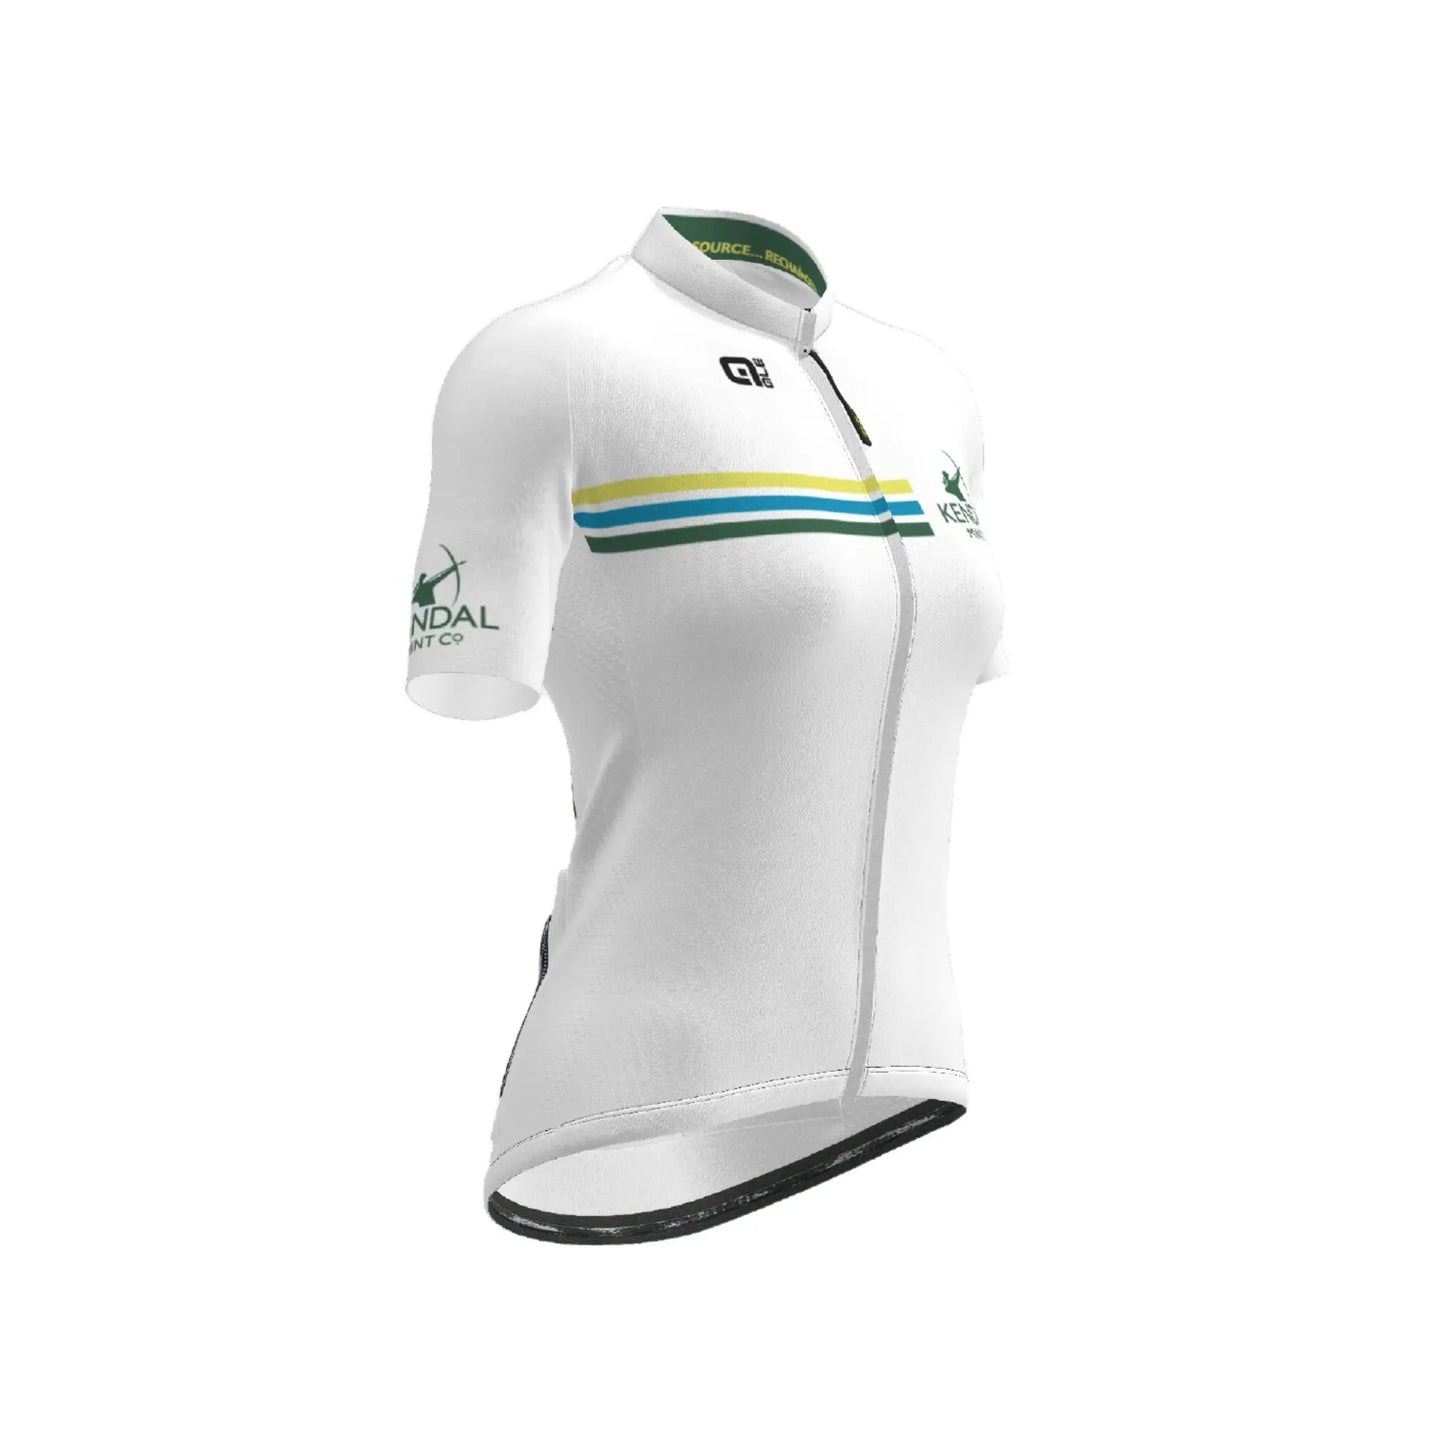 Kendal Mint Co X Alé Cycling Jersey - Women's (Brand New - Limited Edition)